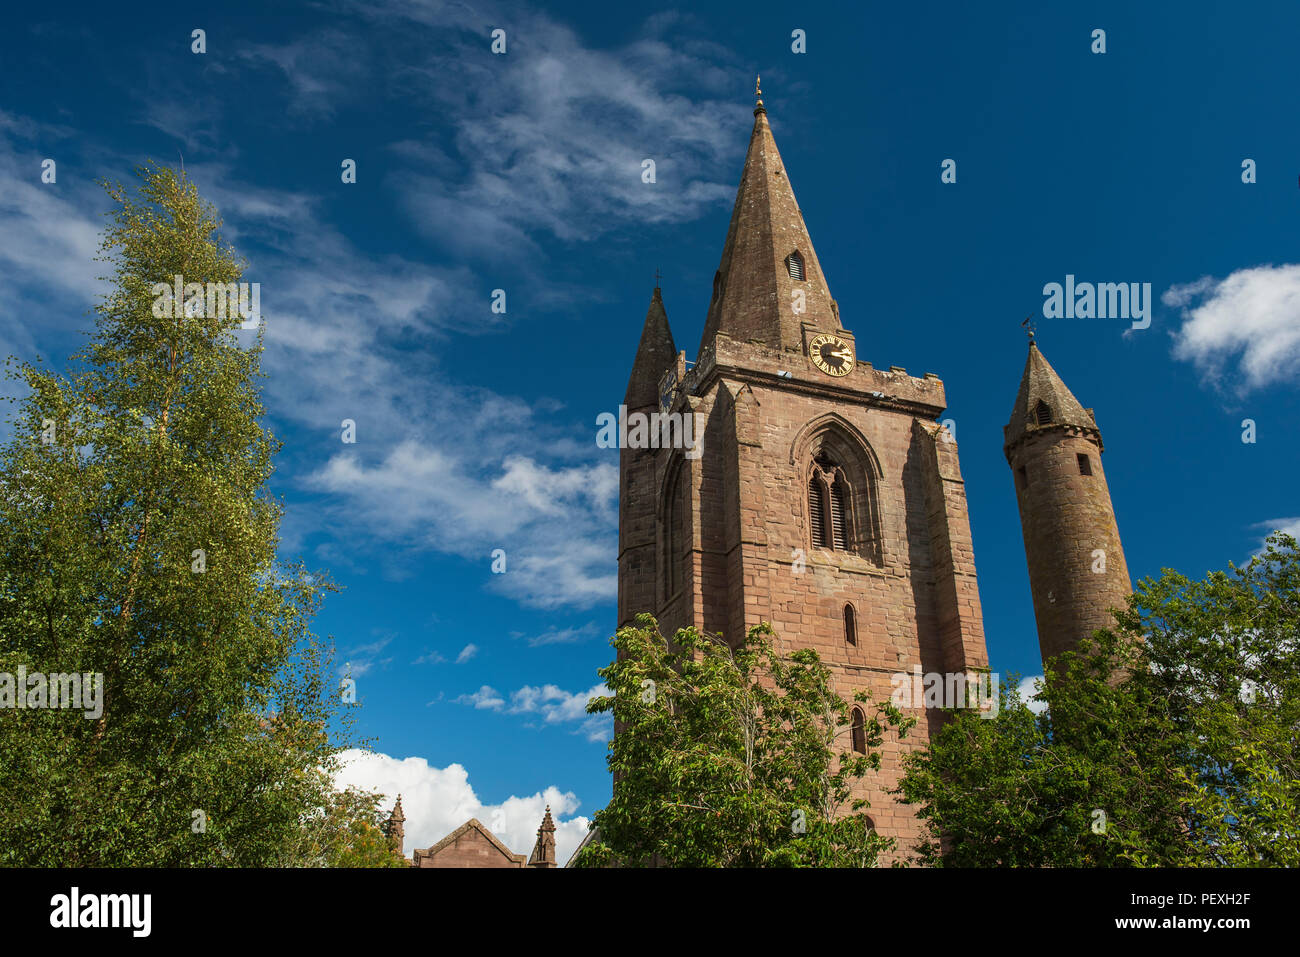 Brechin Brechin Cathedral et Tour Ronde, Angus, Scotland. Banque D'Images